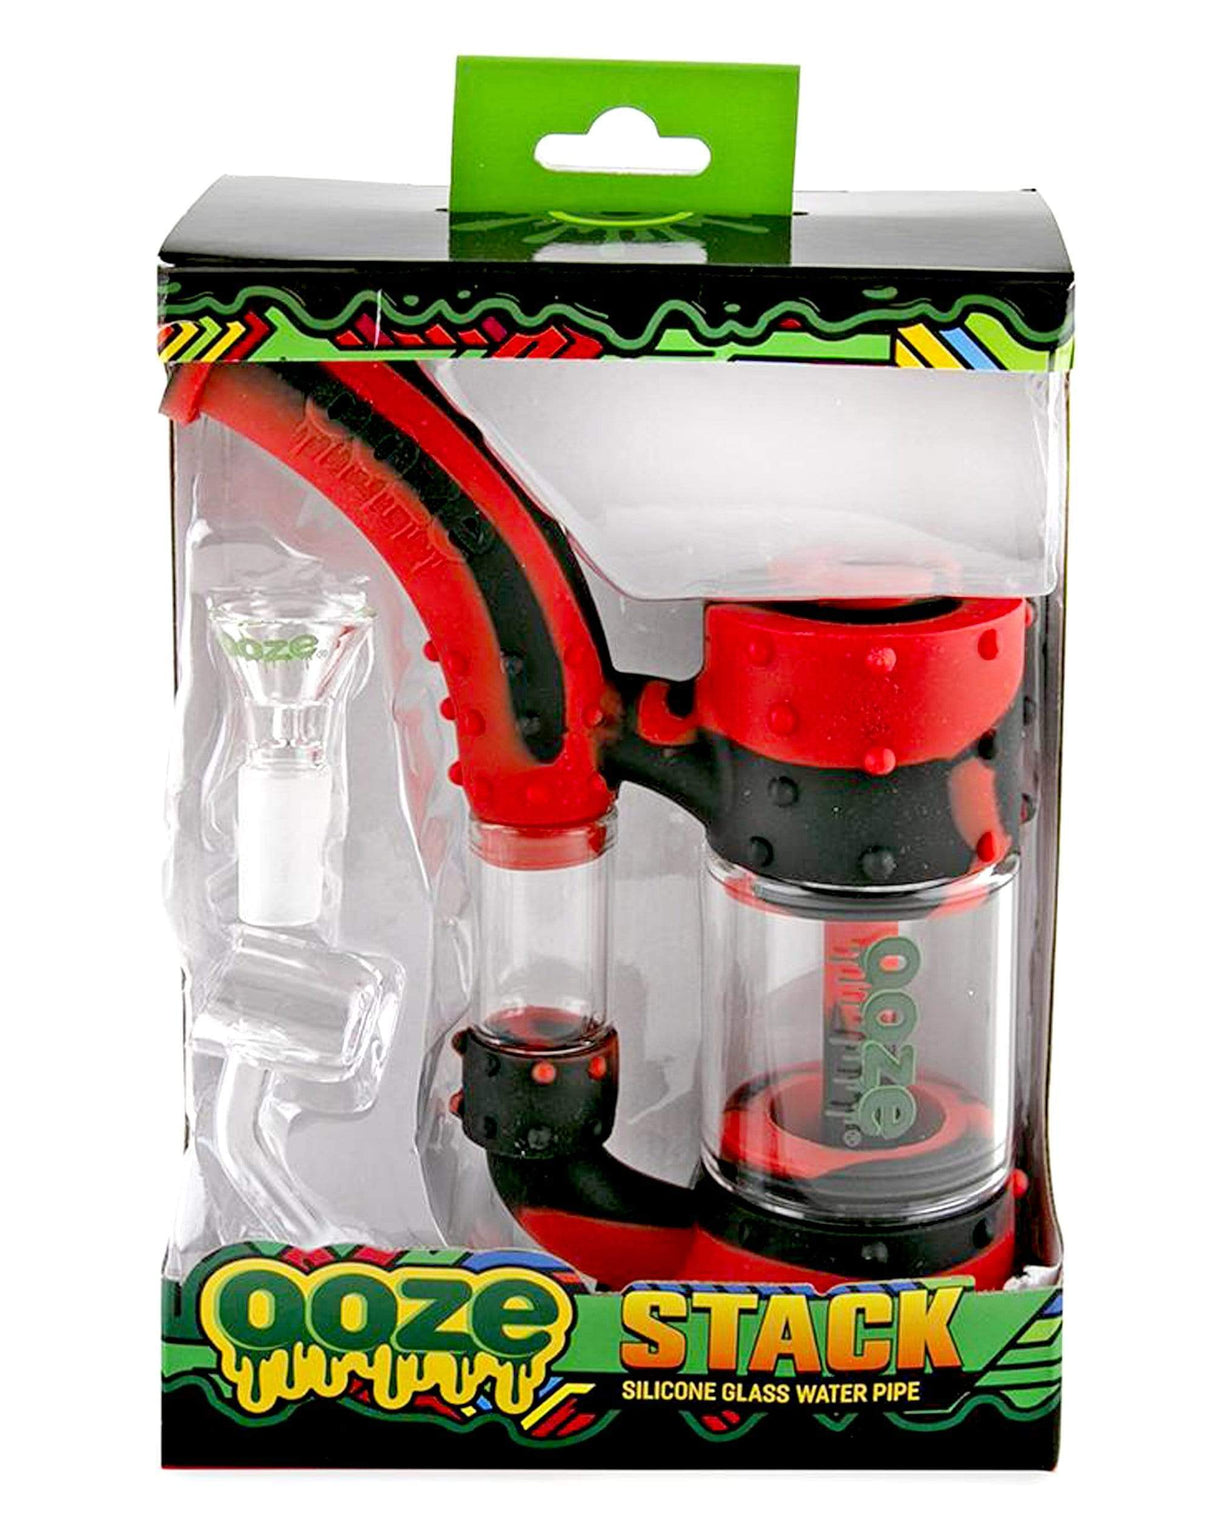 Ooze Stack Silicone Bubbler in packaging, Rasta color, versatile for dry herbs and concentrates